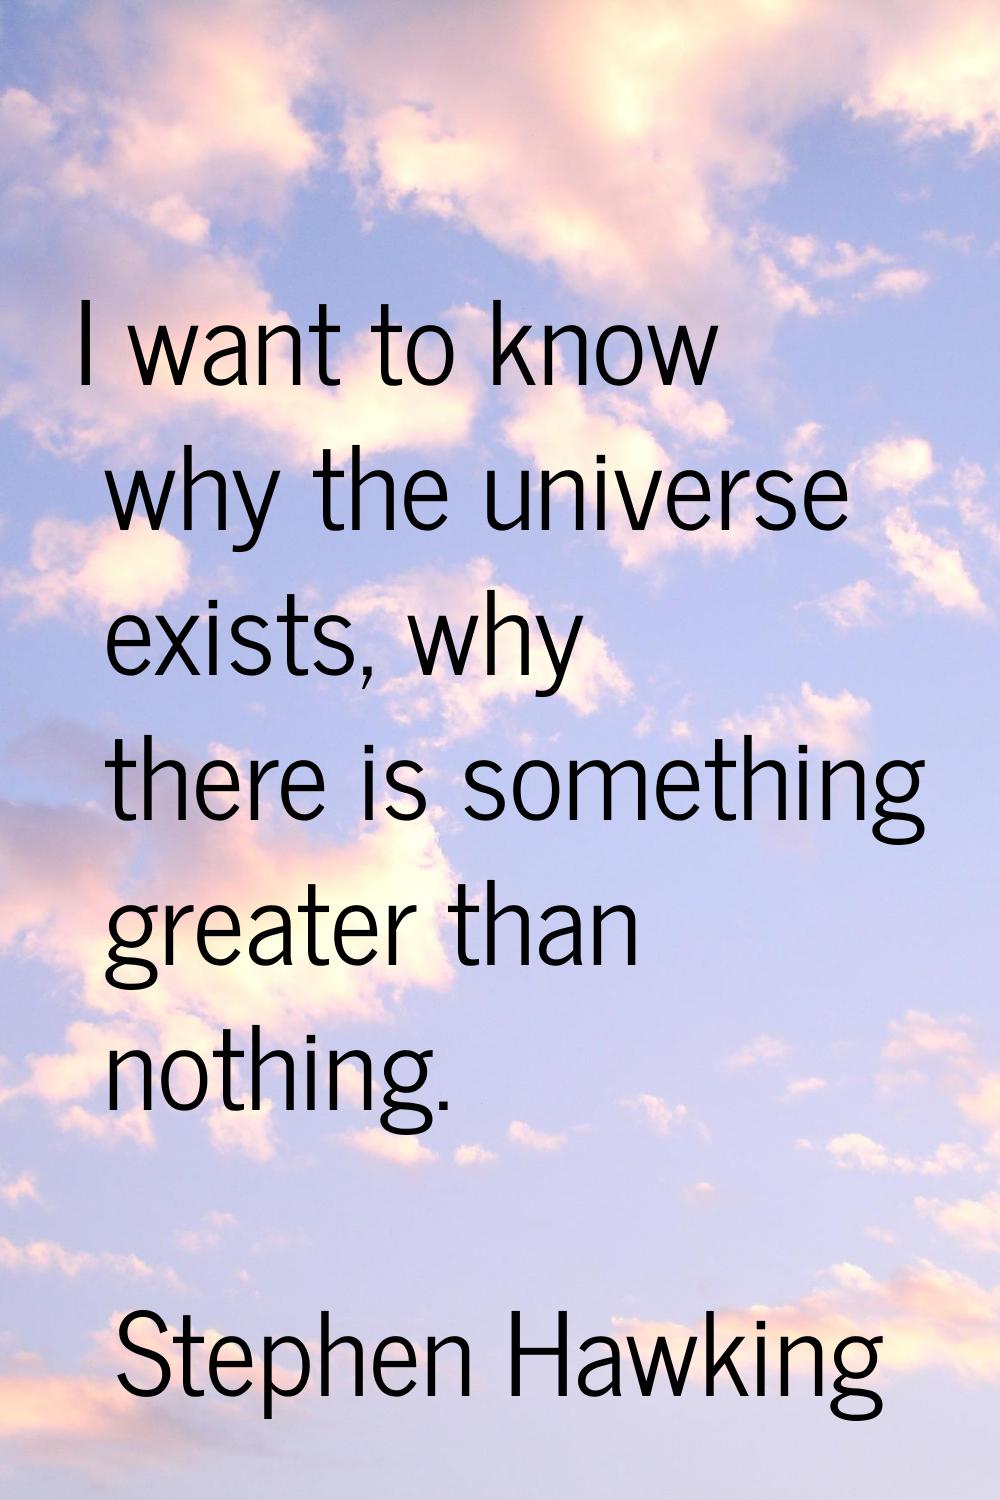 I want to know why the universe exists, why there is something greater than nothing.